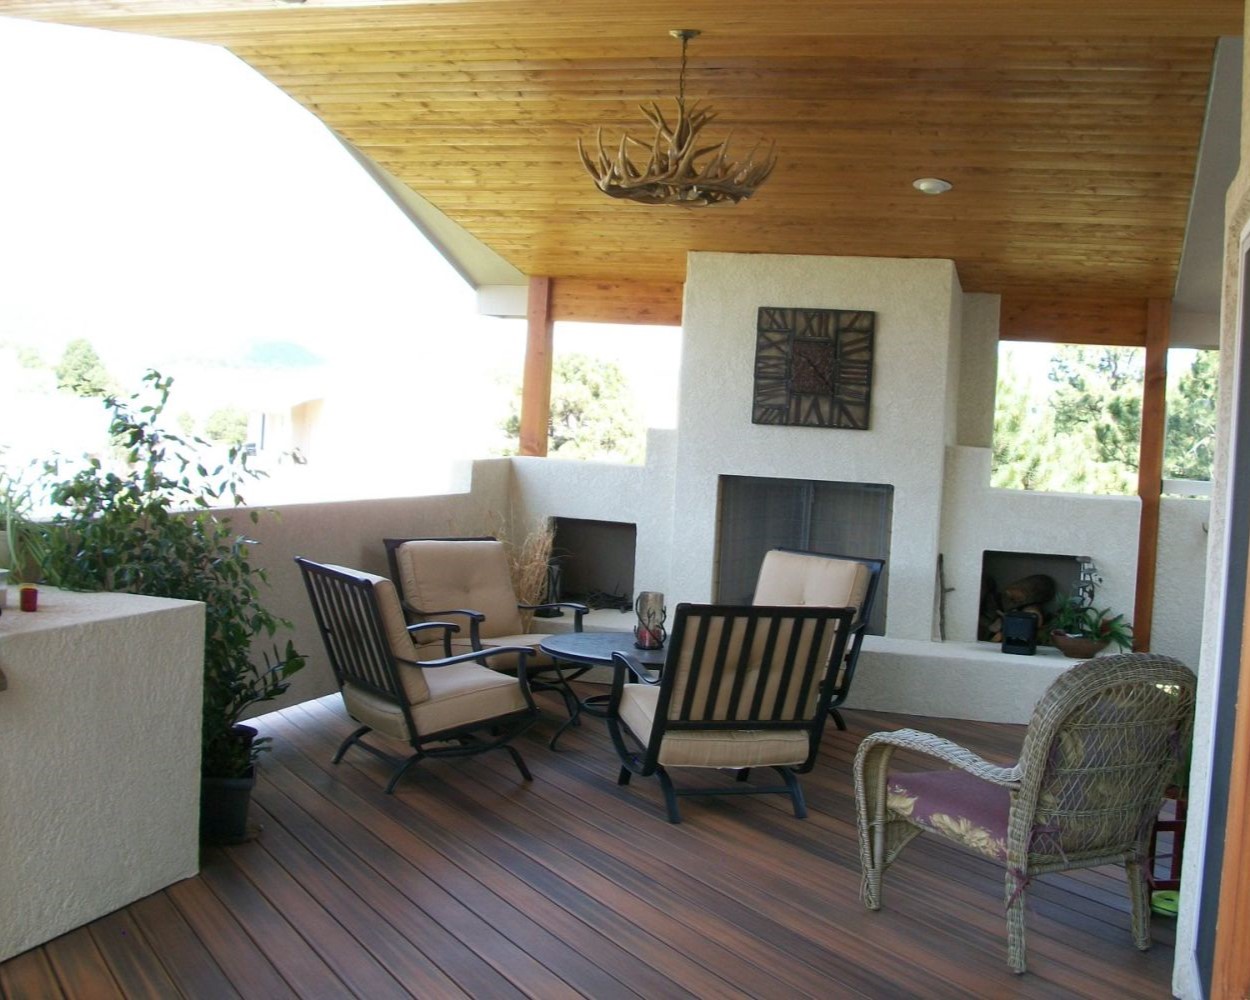 Custom deck built with composite material, features a wood-burning stucco fireplace and gabled deck cover with vaulted tongue and groove ceiling.